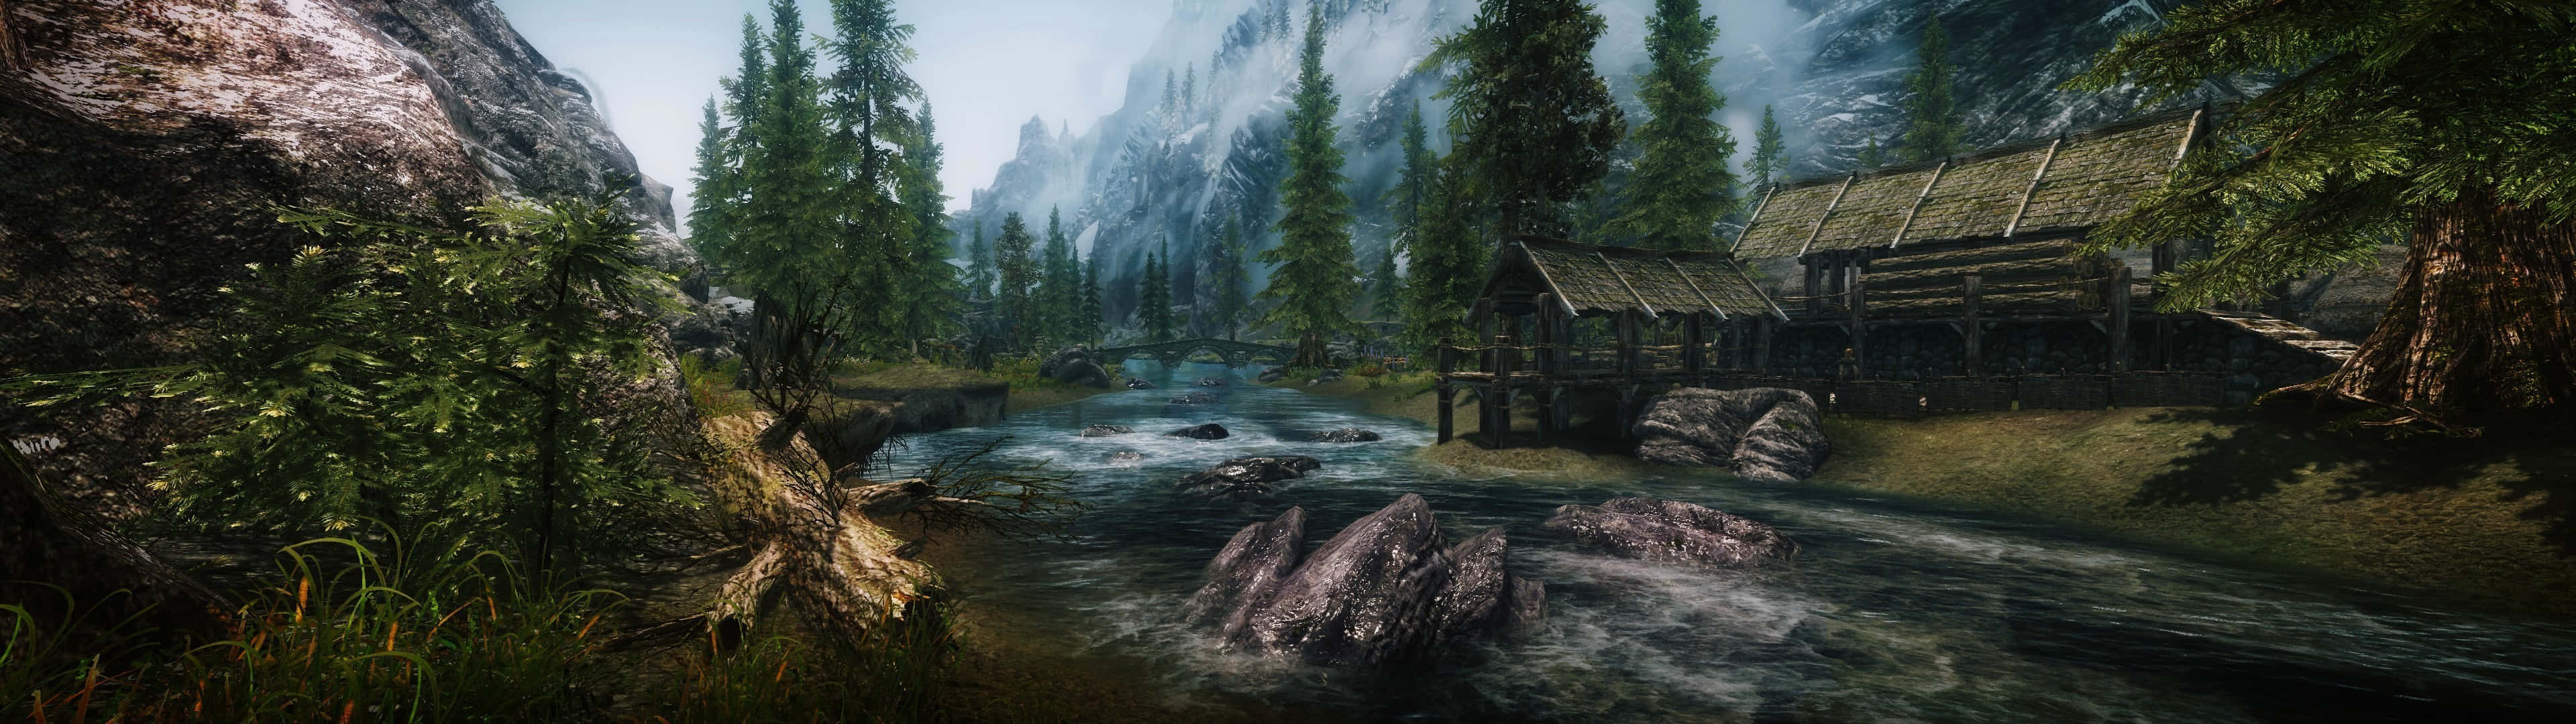 Welcome to the forgotten lands of Skyrim! Wallpaper